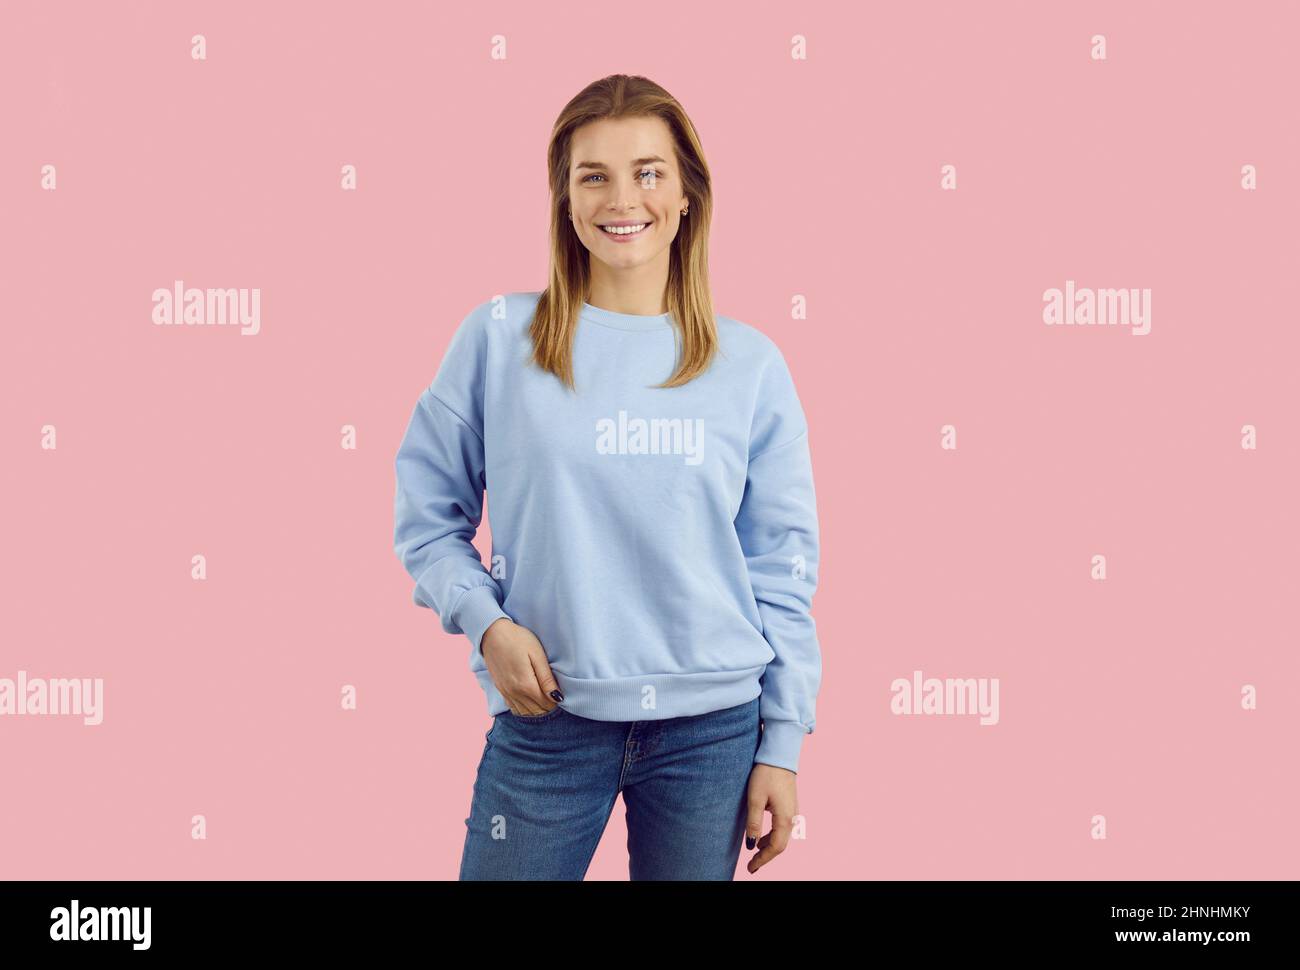 Happy smiling young girl in sweatshirt and jeans posing isolated on pink background Stock Photo